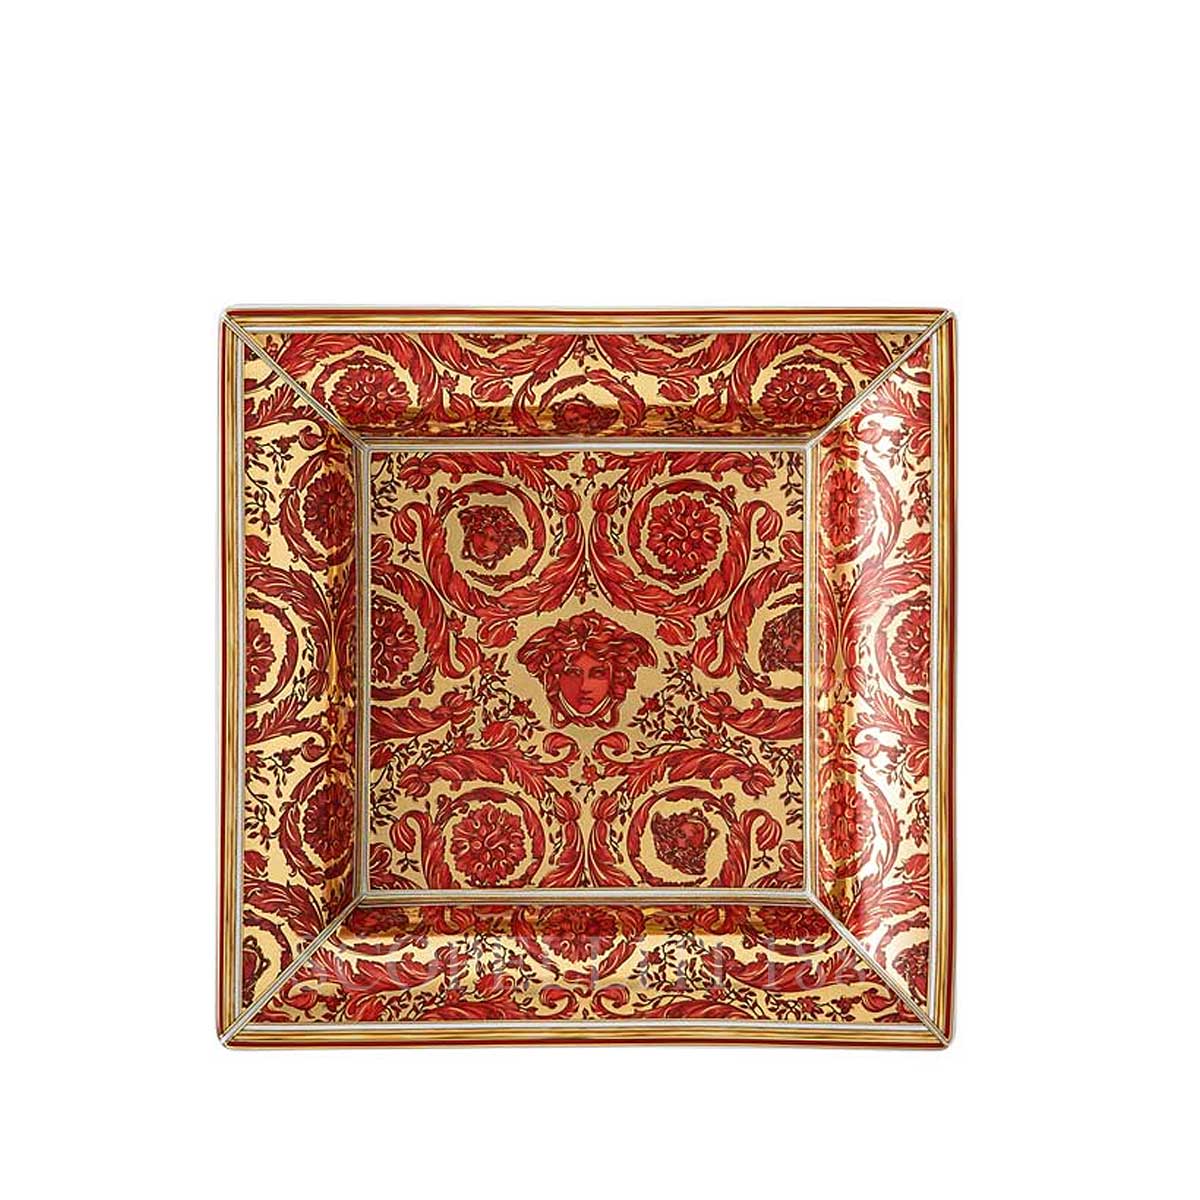 Versace Square Plate 18 cm Medusa Garland Red | Versace Gift